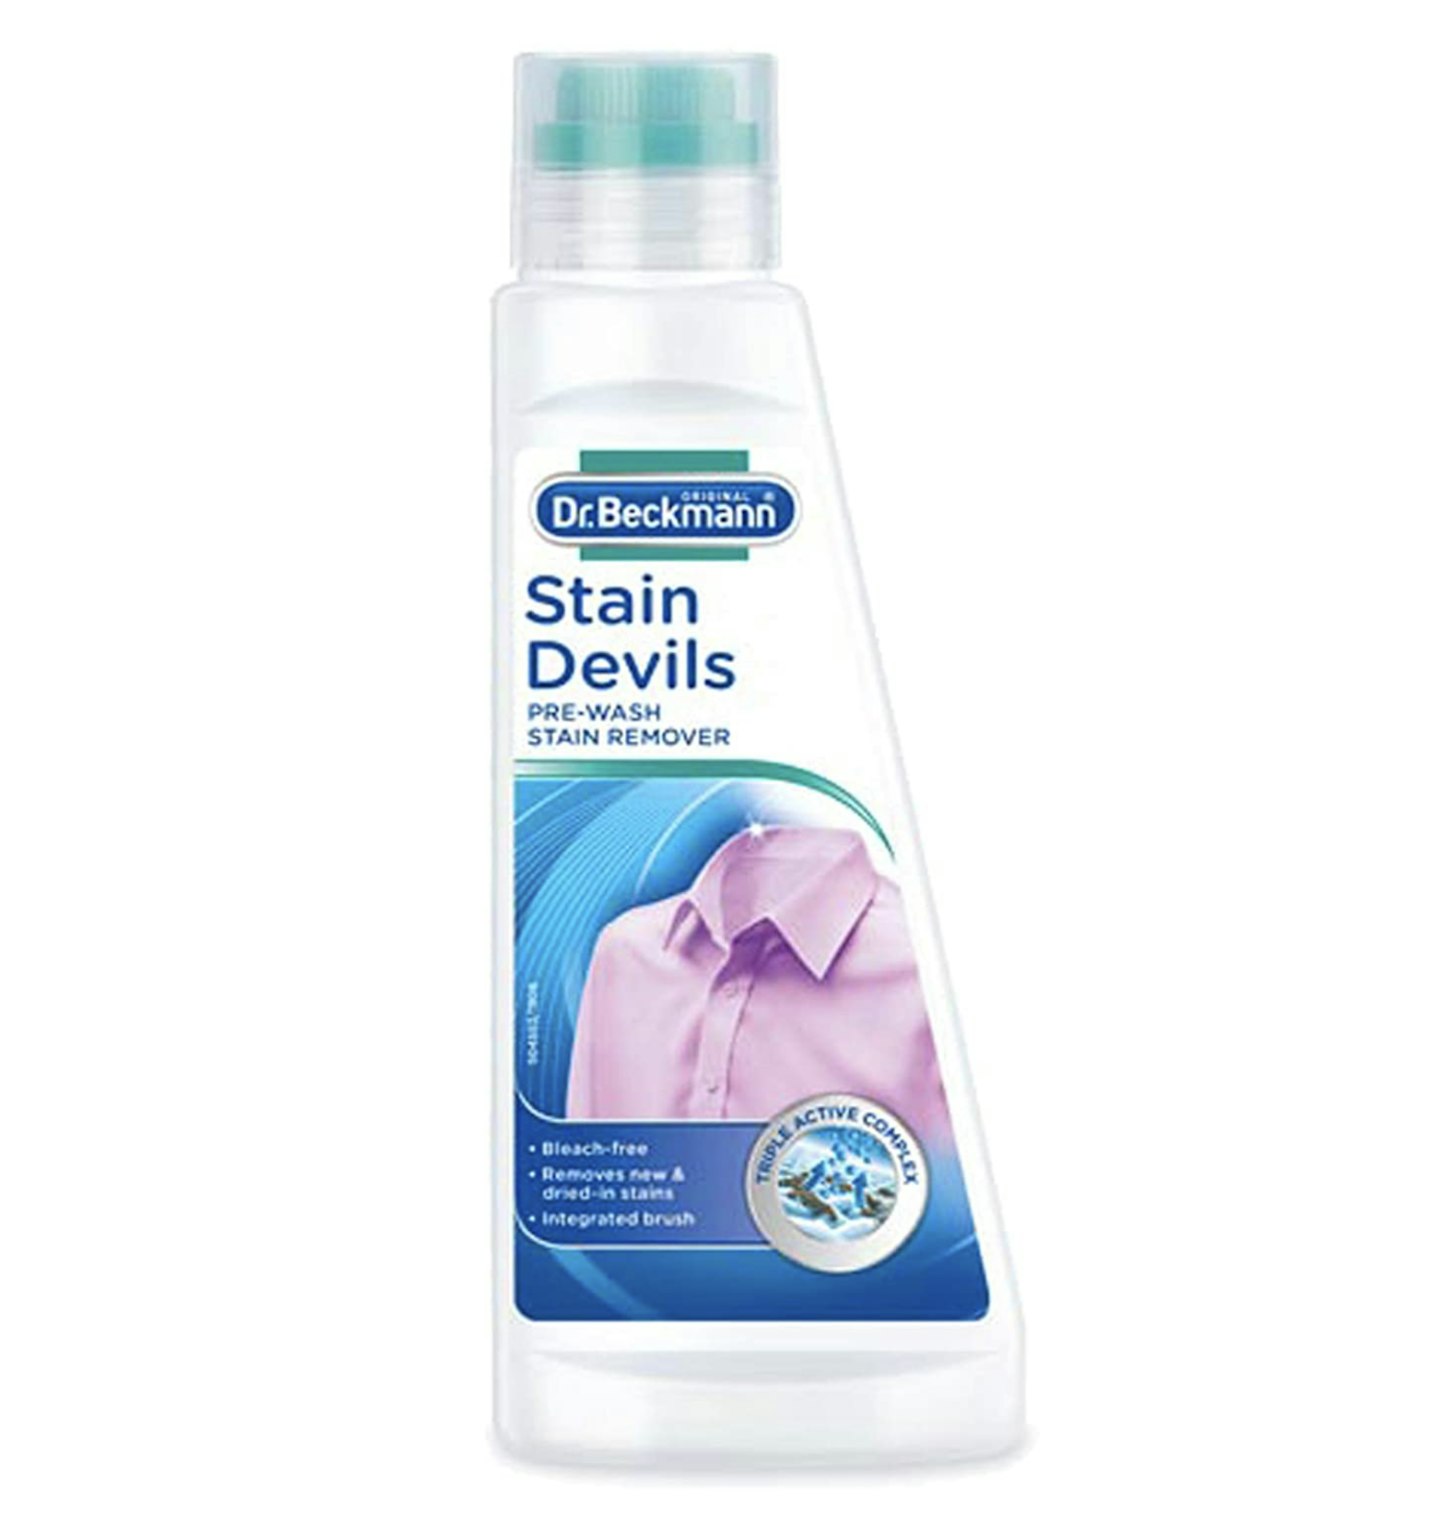 Dr Beckmann Stain Devils Pre-Wash Bleach Free Stain Remover - Pack of Three